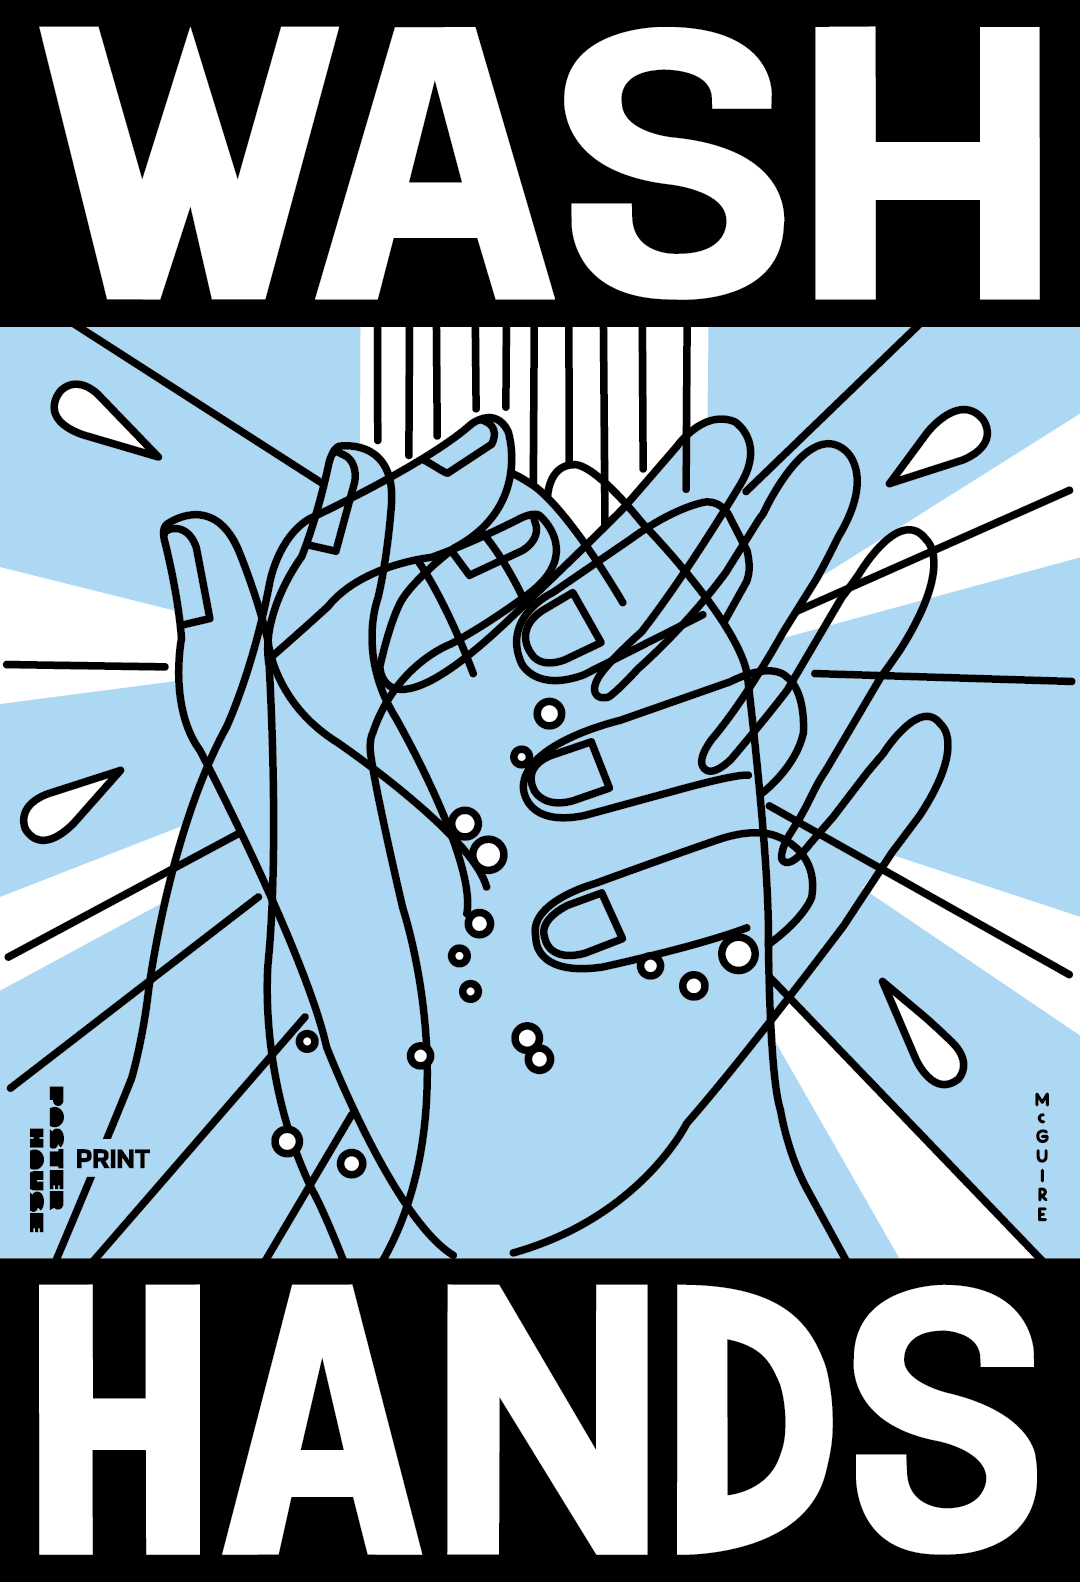 An illustrative poster of washing hands under running water.